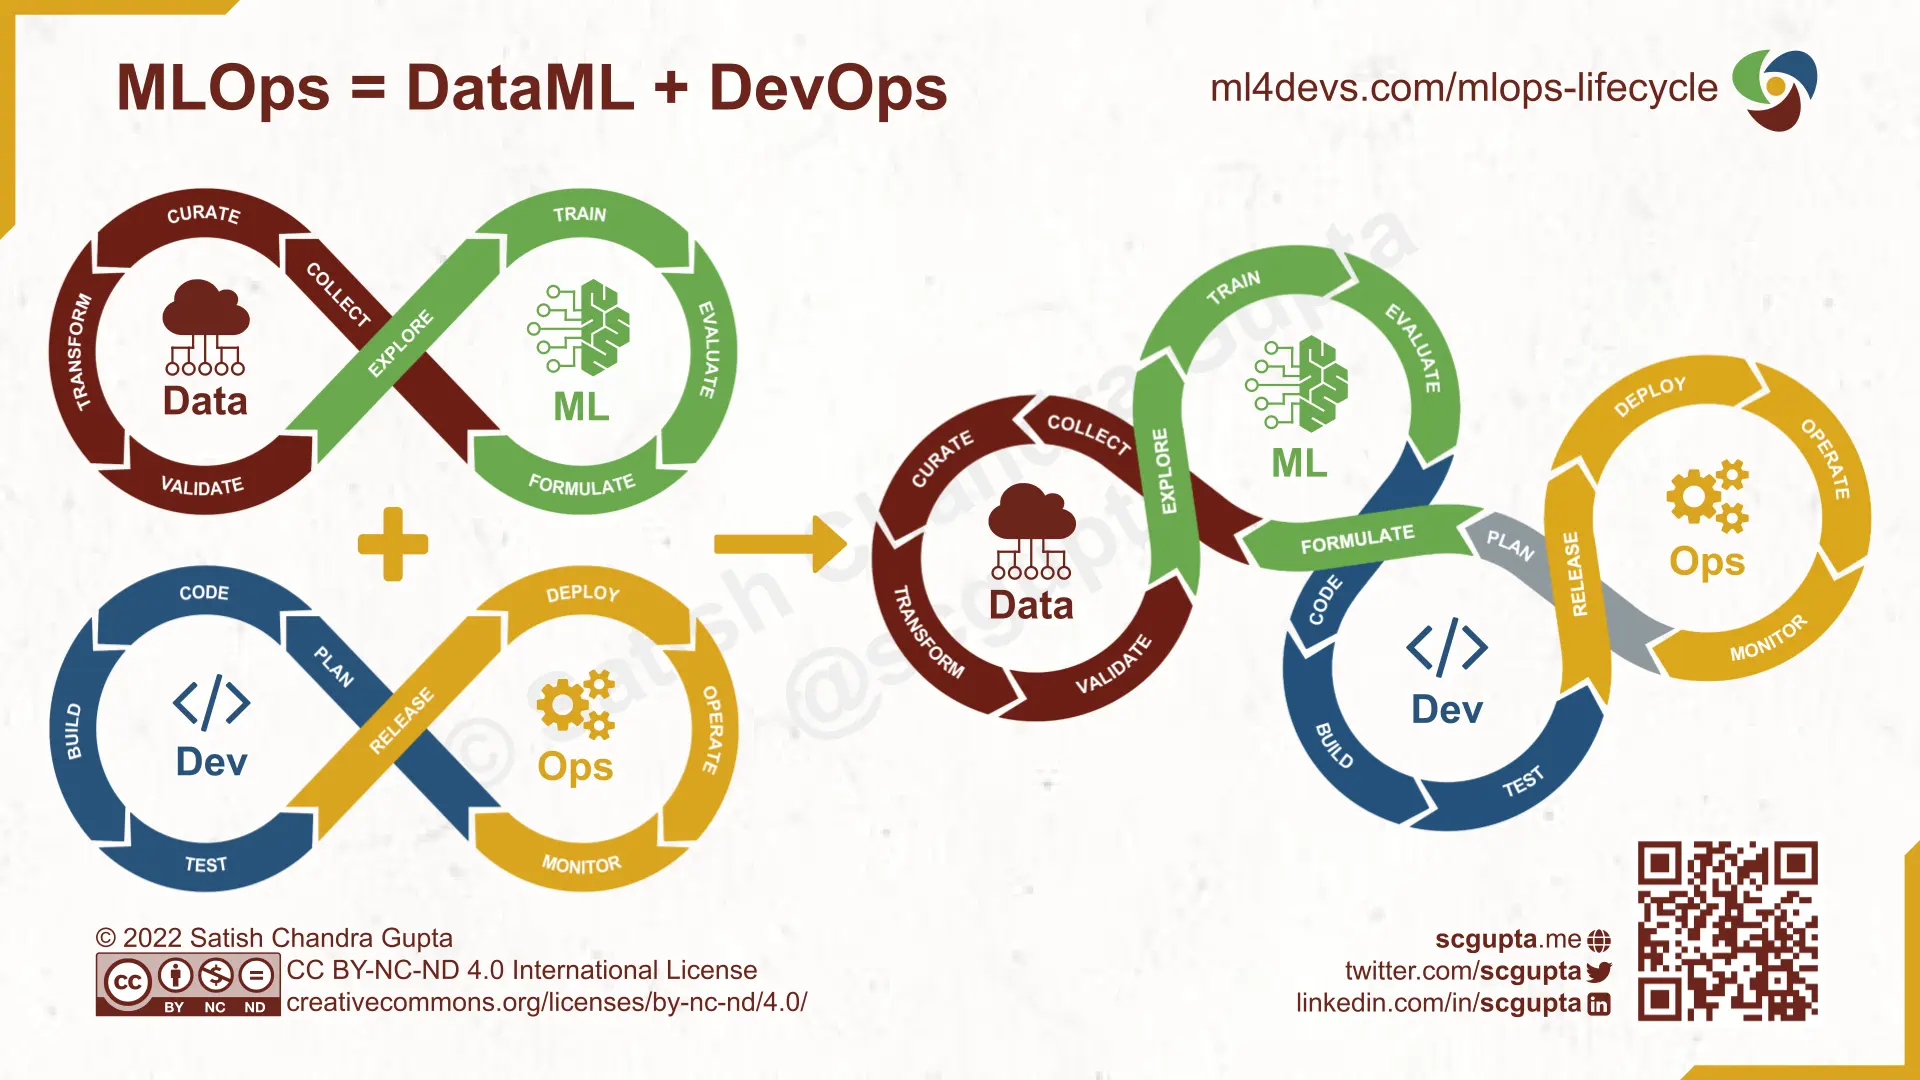 Model Development and Software Development need to stitch together into unified MLOps Lifecycle